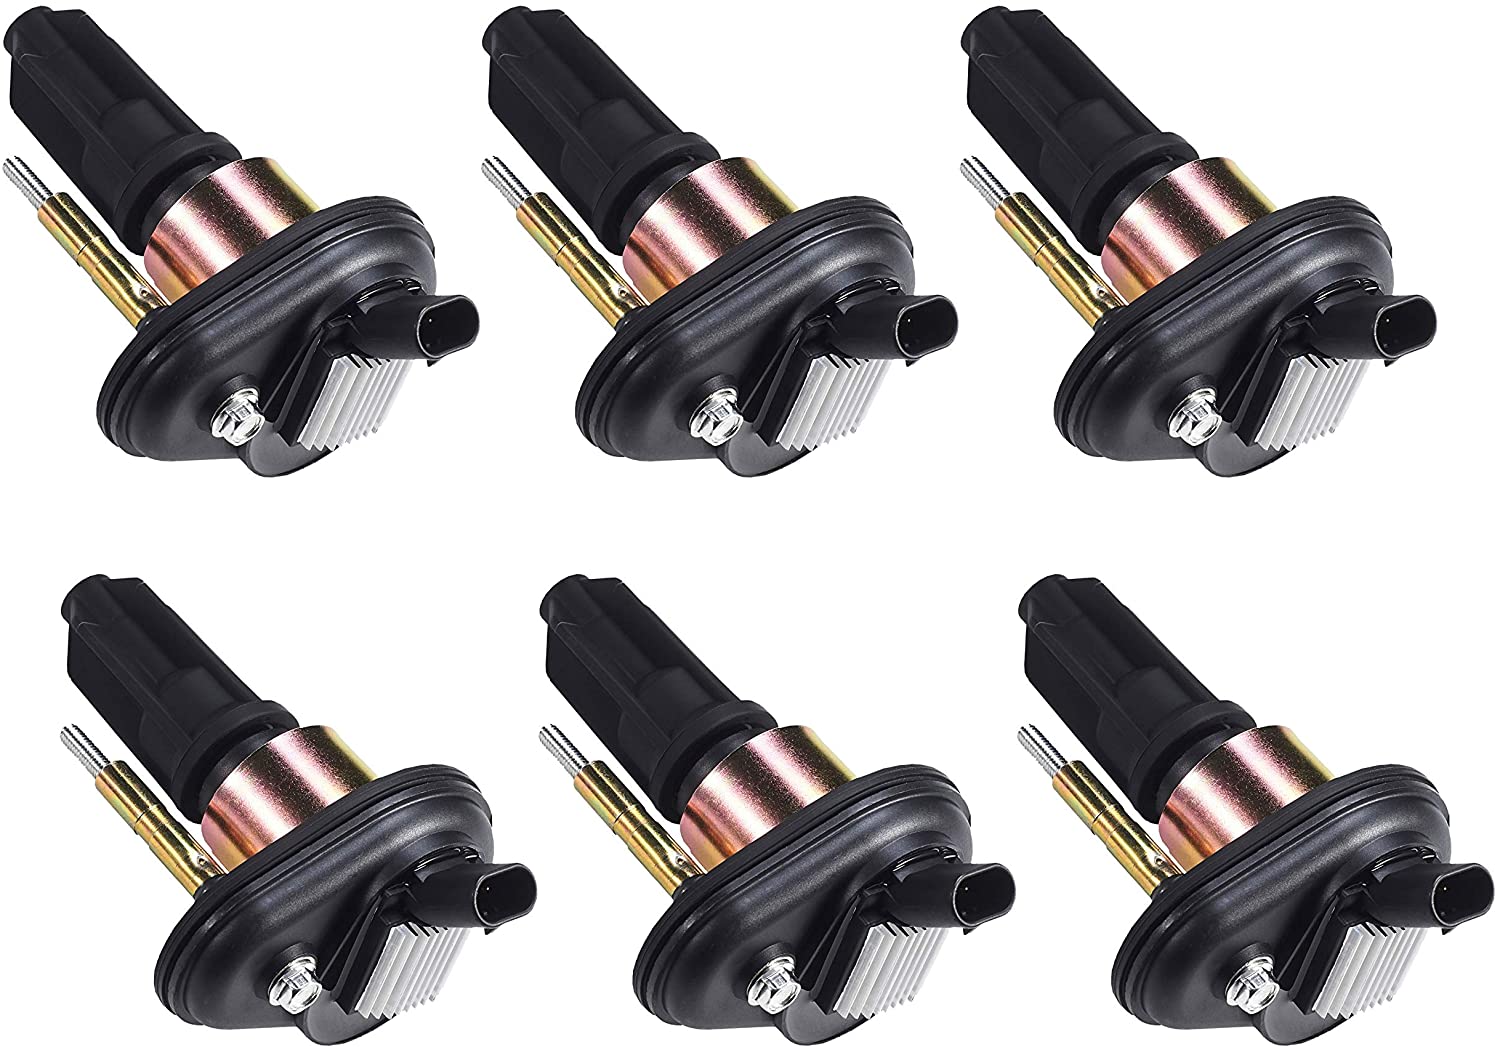 ENA Pack of 6 Ignition Coils compatible with Chevy - Trailblazer - Envoy - Rainer- Colorado - Canyon - Isuzu - Chevrolet GMC Olds Saab UF303 C1395 UF-303